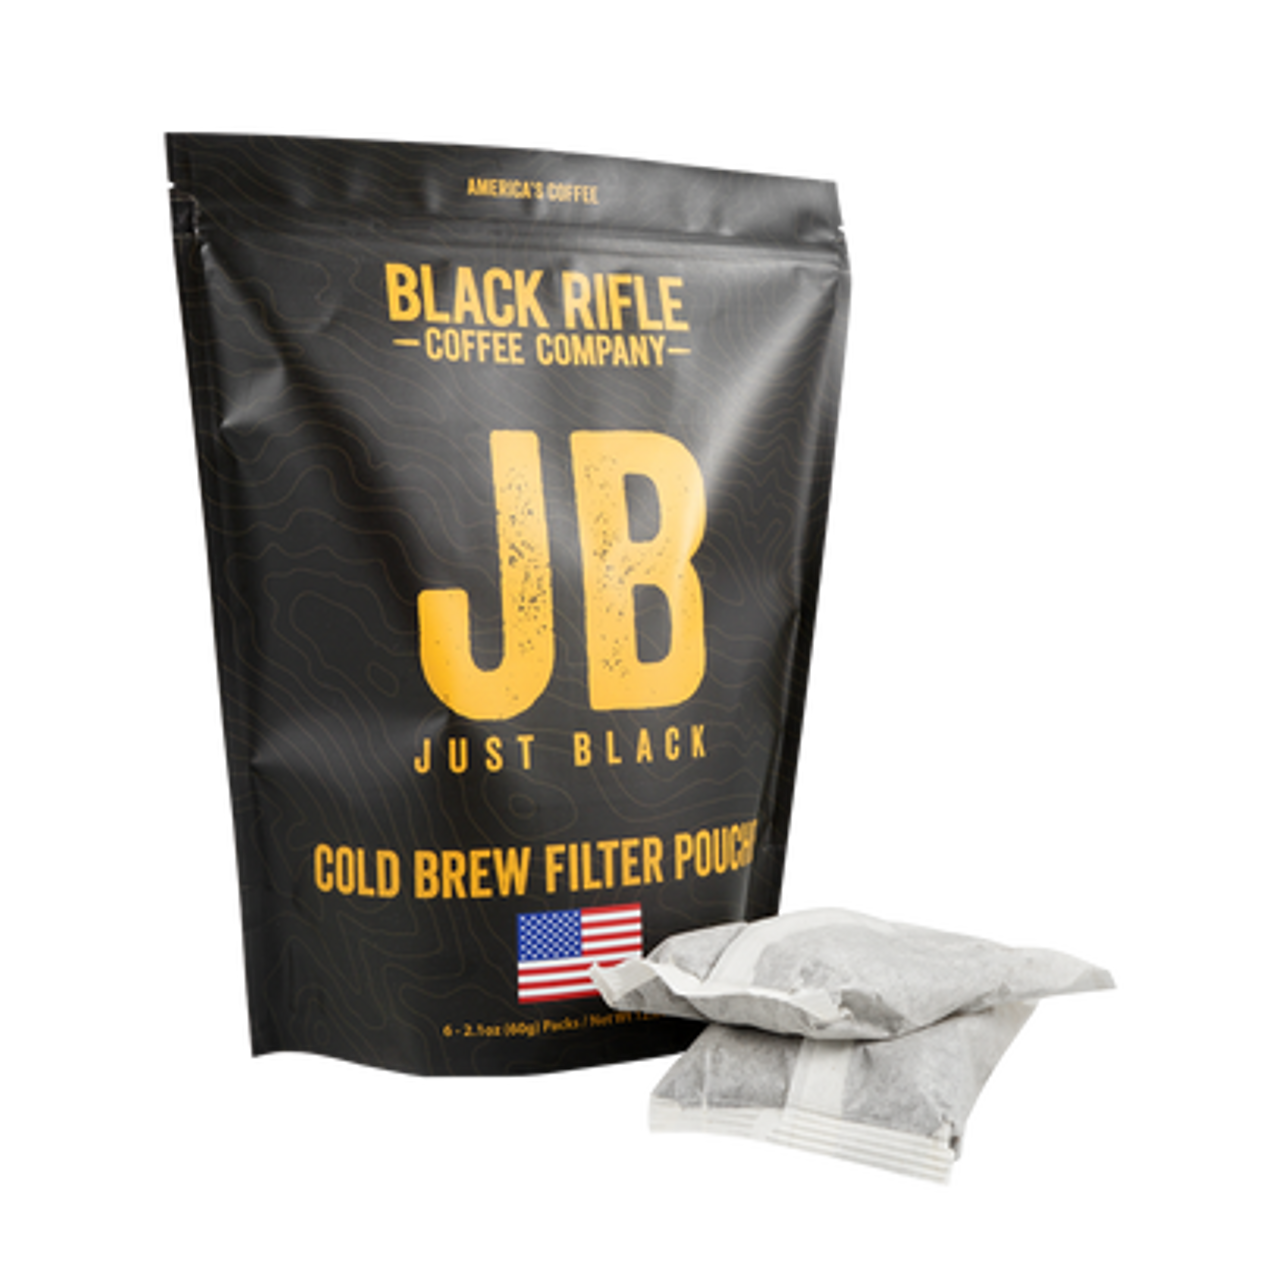 https://cdn11.bigcommerce.com/s-kk2jd0cxqh/images/stencil/1280x1280/products/15998/6772/black-rifle-coffee-company-brcc-cold-brew-filter-pouches__17214.1648497505.png?c=1